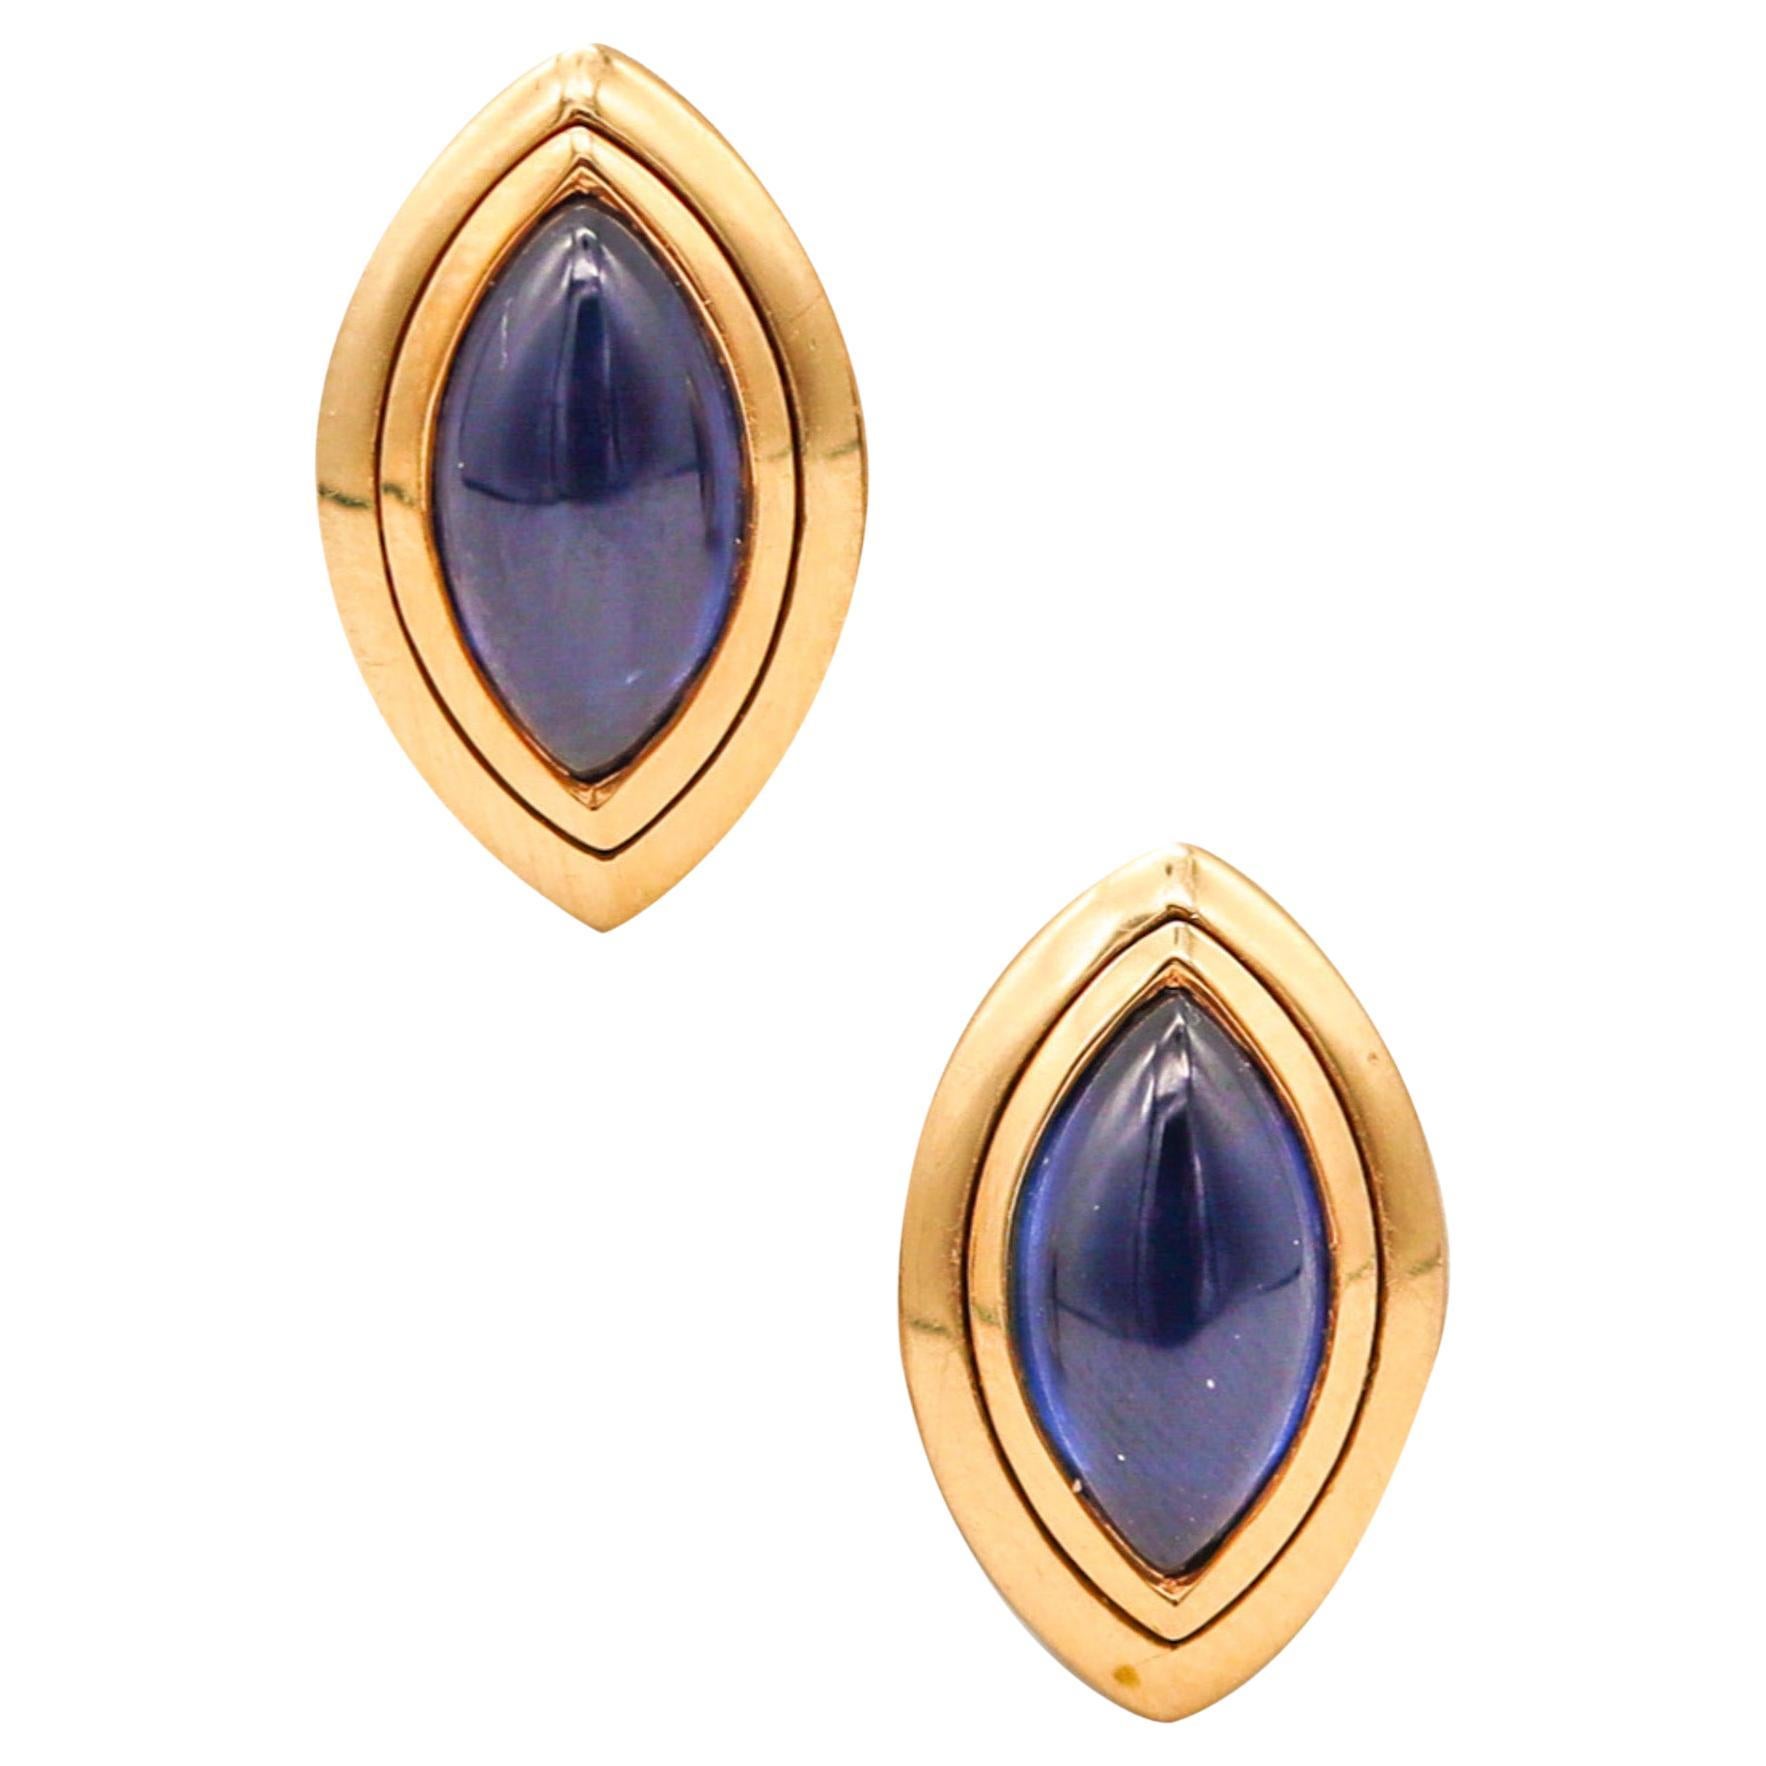 Hemmerle Munich Clips On Earrings In 18Kt Yellow Gold With 9.62 Ctw In Sapphires For Sale